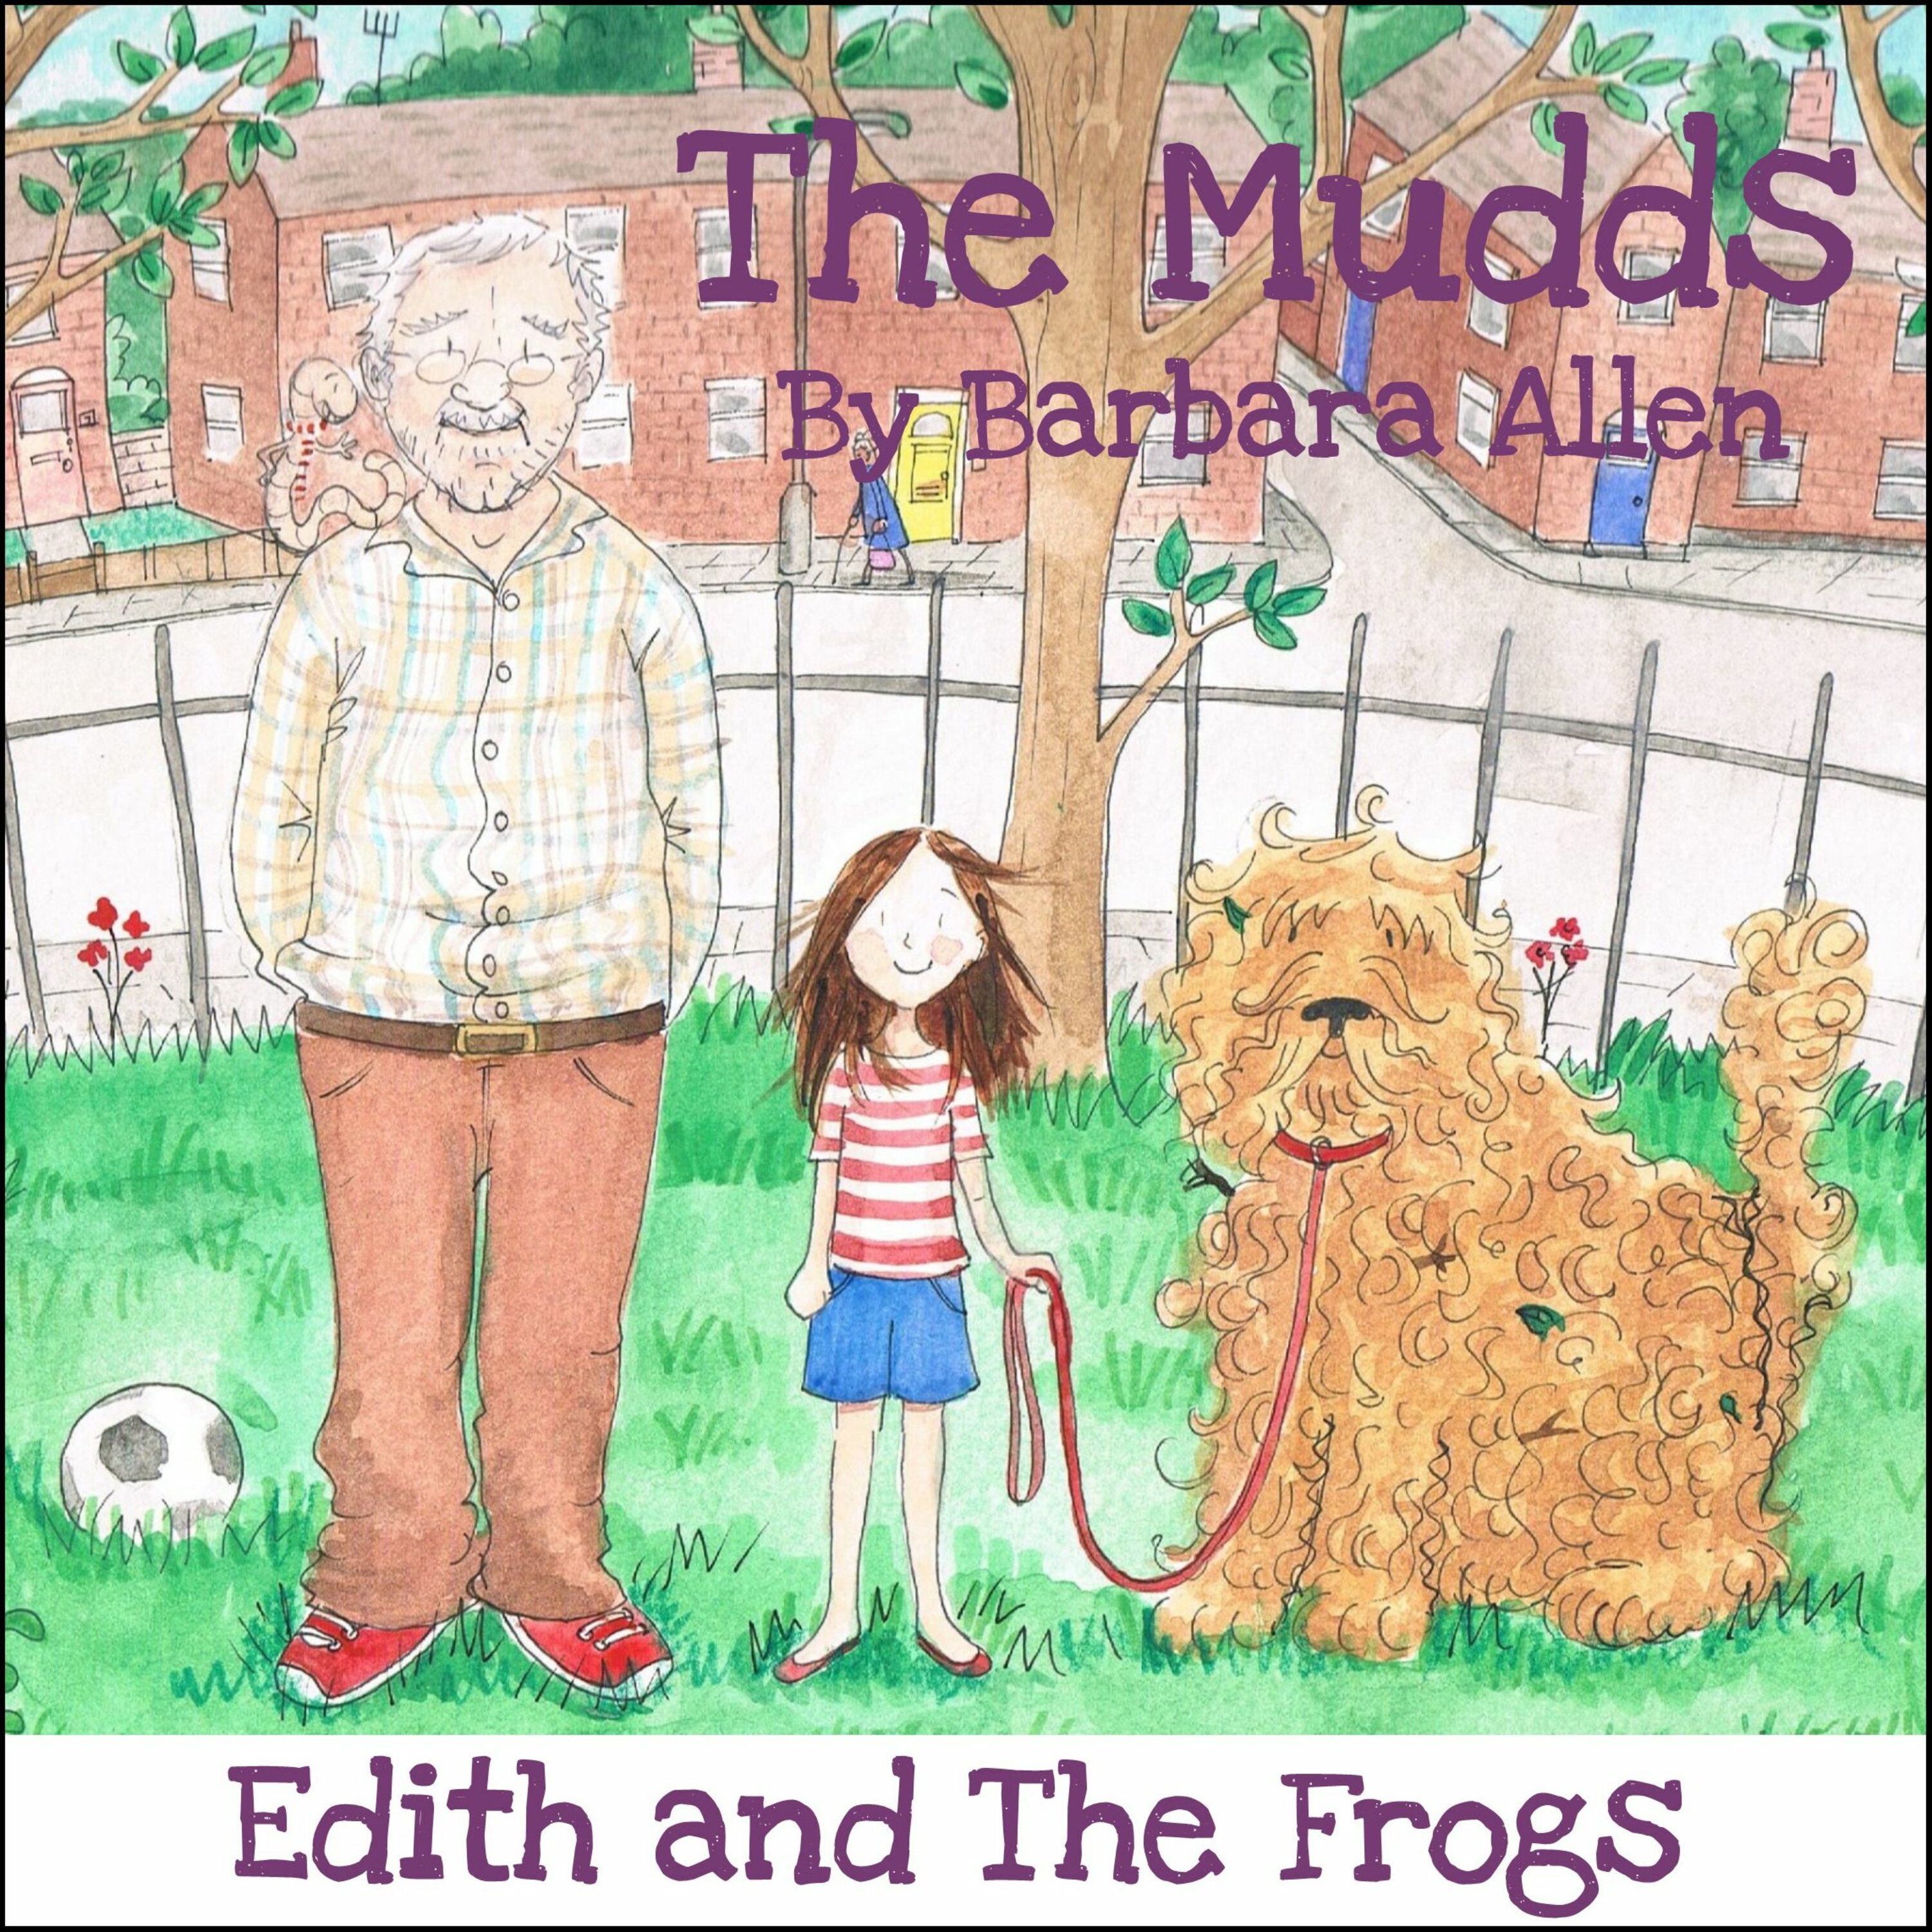 Edith and the Frogs